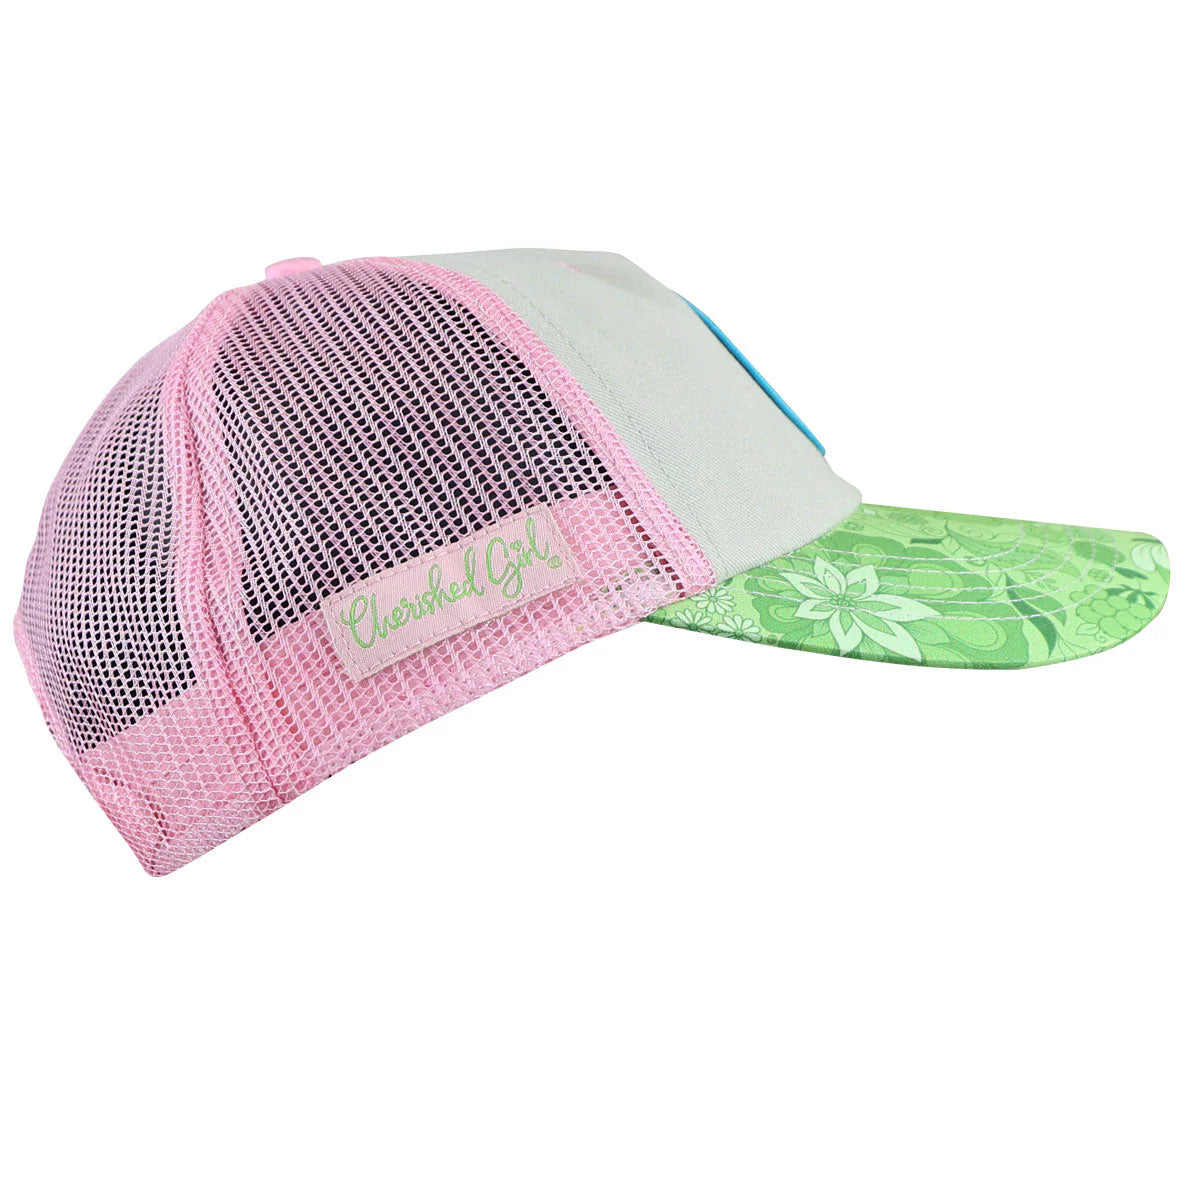 Cherished Girl Womens Cap Lord Lifts Me Up Cherished Girl® Apparel Hats Hats / Beanies Women's